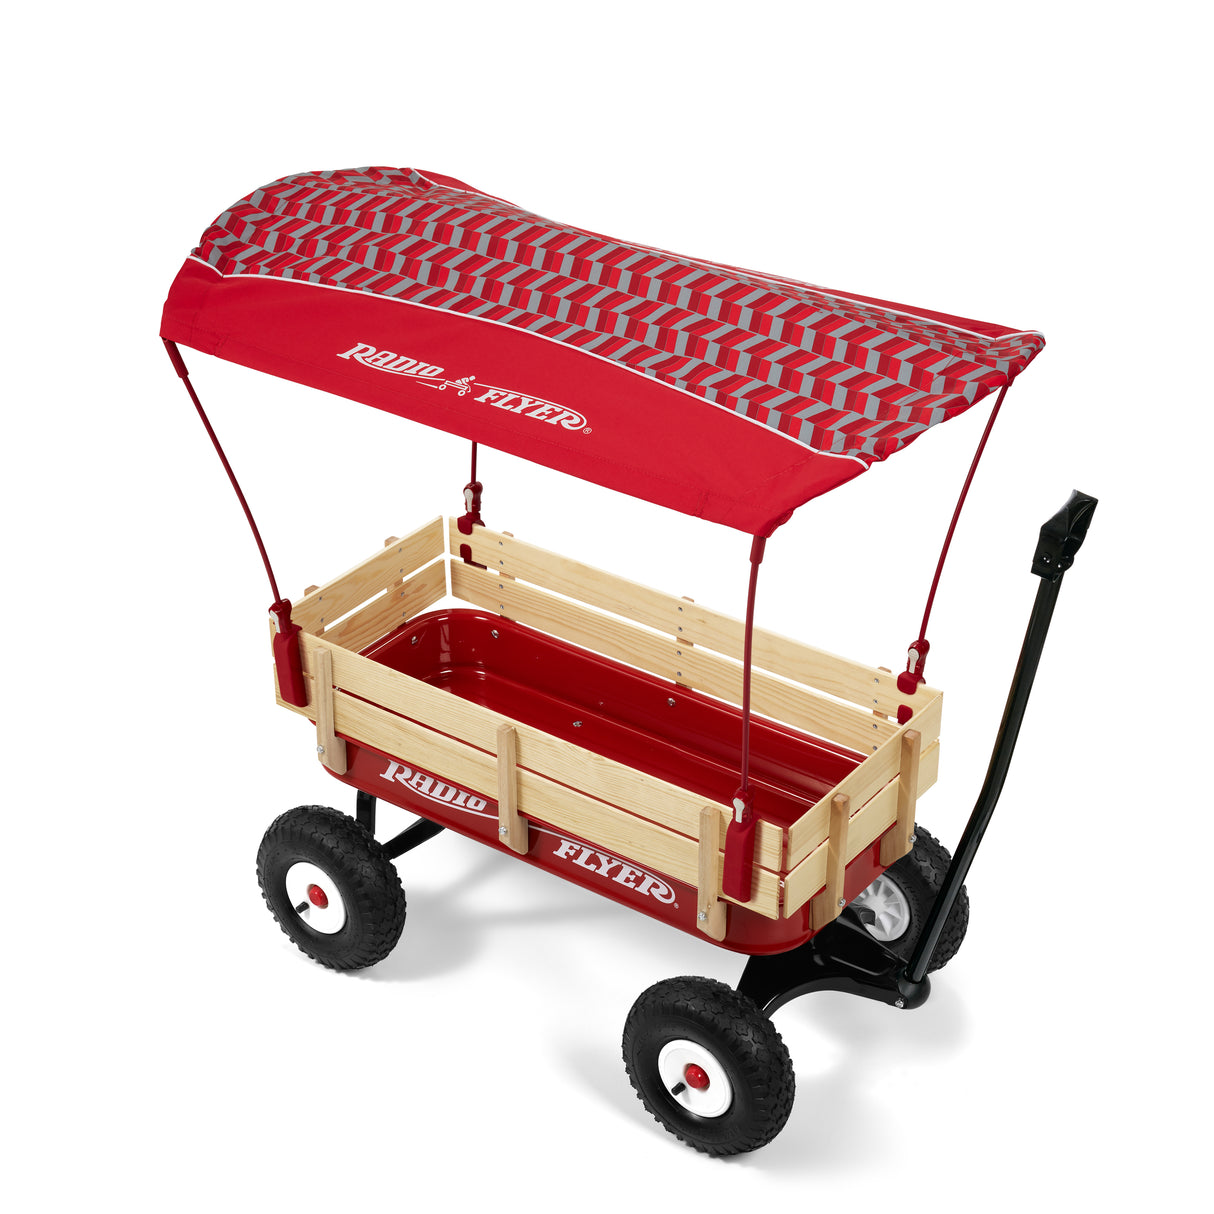 All-Terrain Steel & Wood Wagon with Canopy